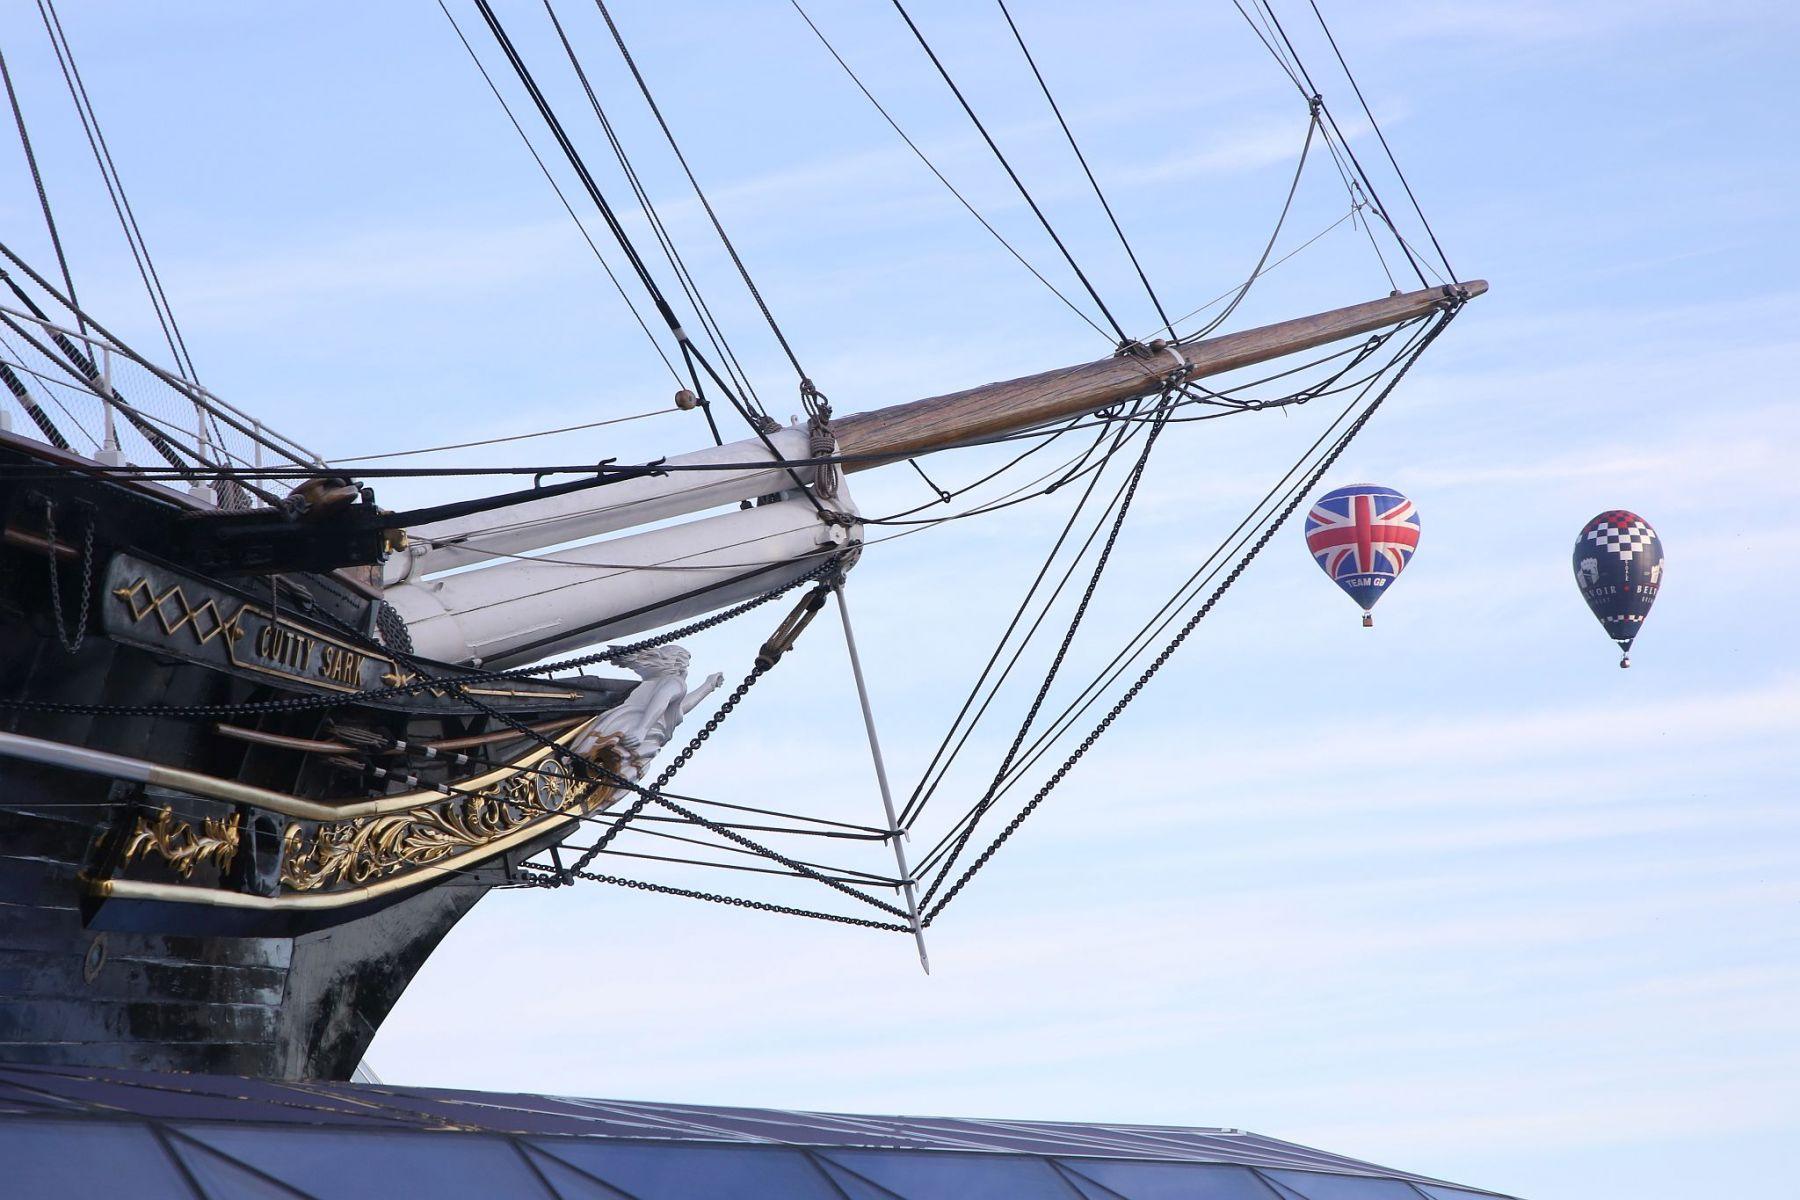 A flight of 46 hot air balloons taking part in the 2019 Lord Mayor’s Balloon Regatta fly over Greenwich passing the Cutty Sark ship and Old Royal Navy College by the River Thames early on the morning of  09-Jun-2019. City of London.